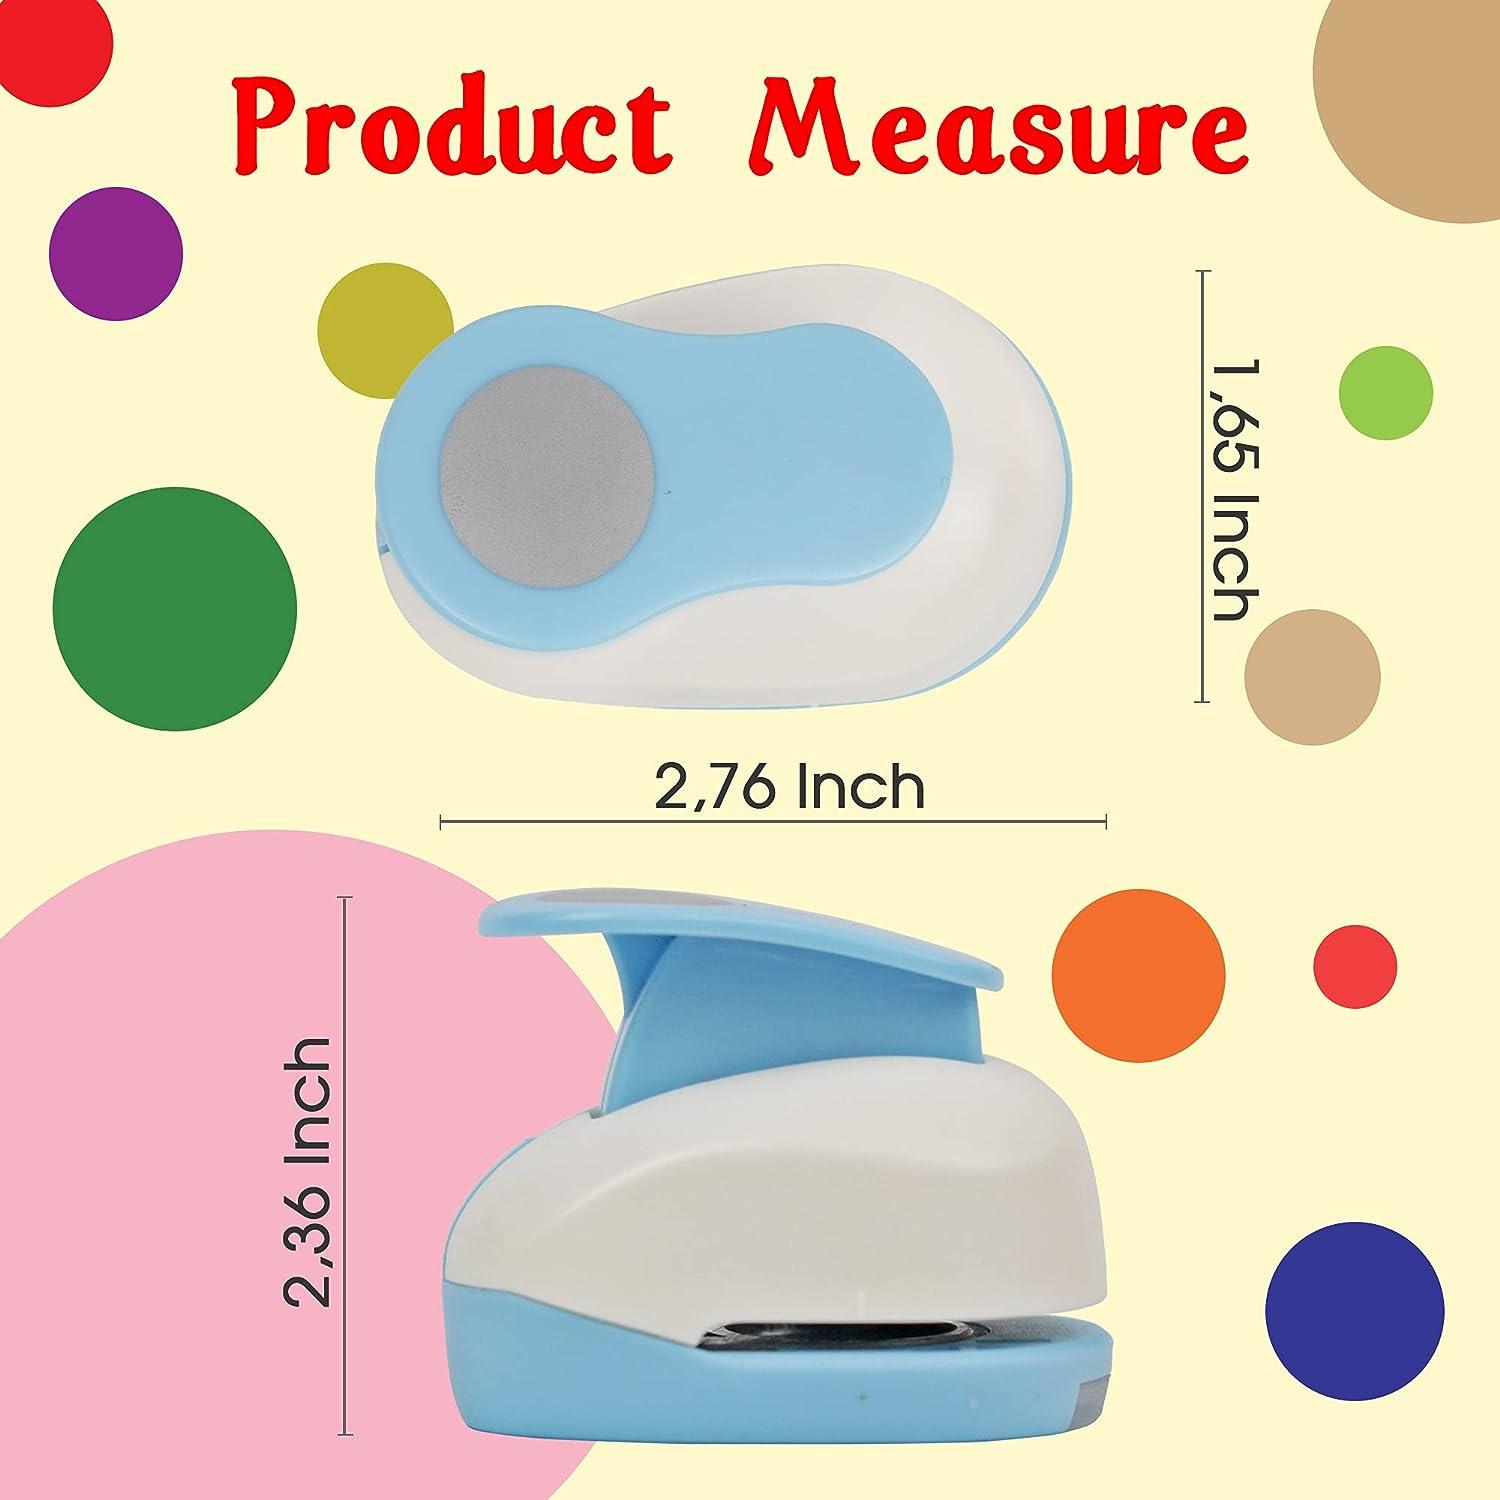 Tab Punch Label Tag Punch Paper Crafts Tab Paper Punch DIY Hole